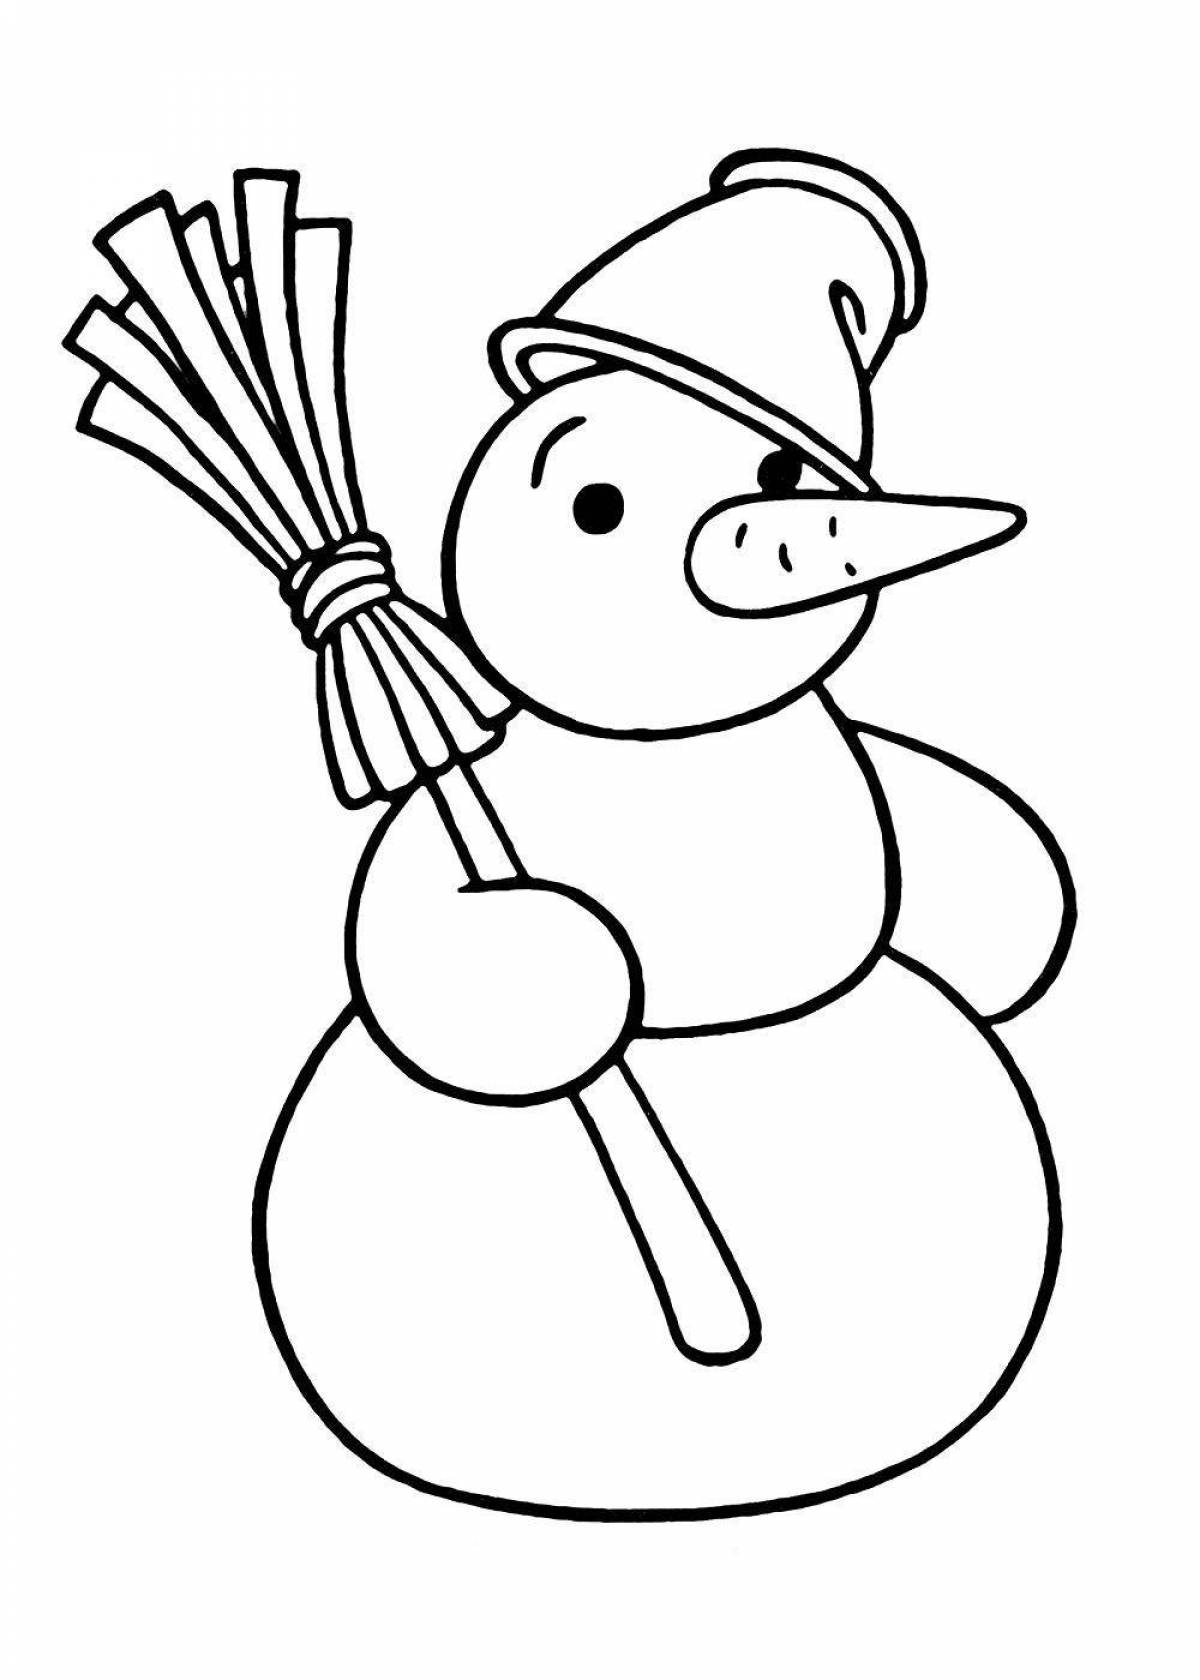 Glittering snowman coloring book for kids 4-5 years old